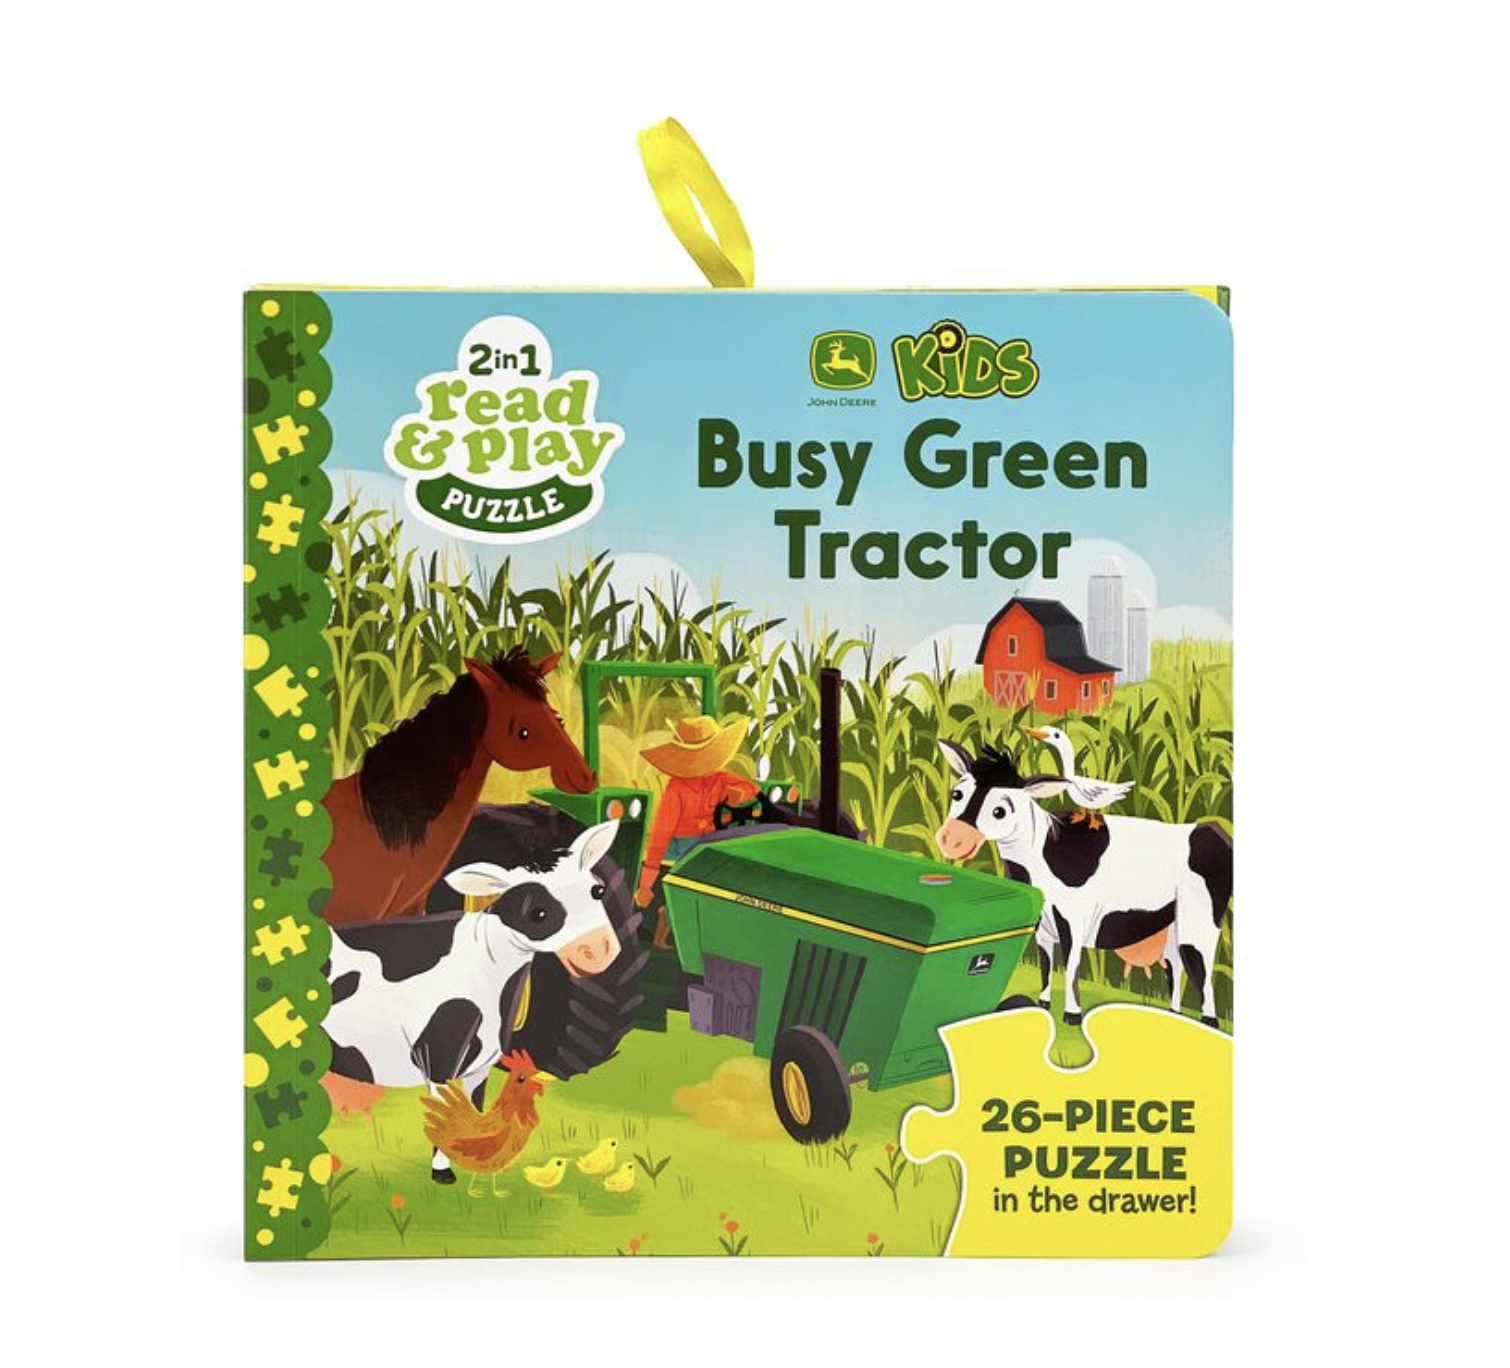 Busy Green Tractor Puzzle 2-in-1 Book